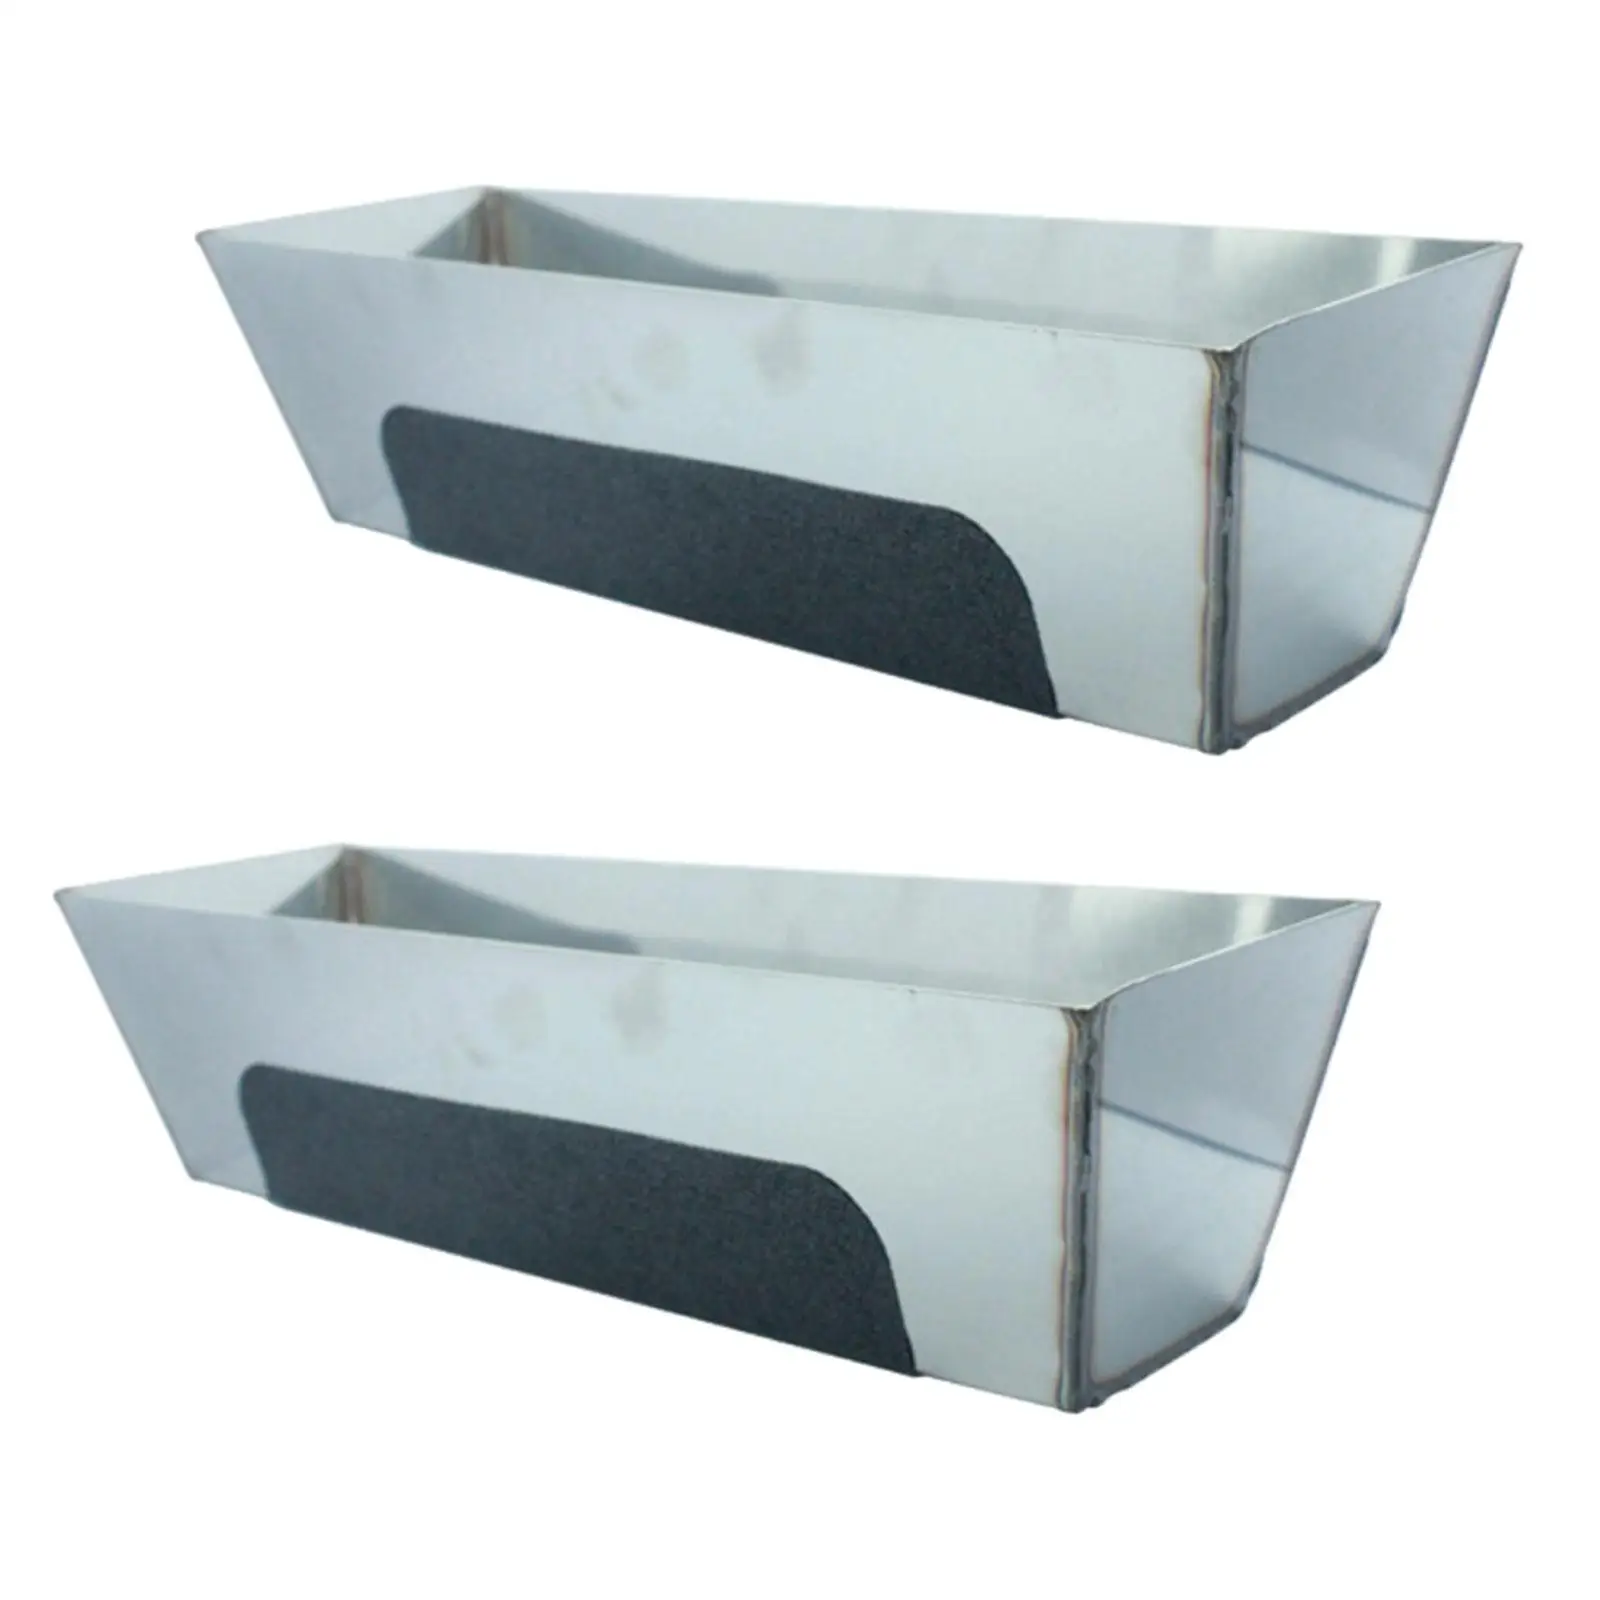 Stainless Steel Mud Pan Sturdy Bucket Metal Heavy Duty Tray Tool Anti Slip Drywall Sheared Edges Mud Pan for Easy Knife Cleaning